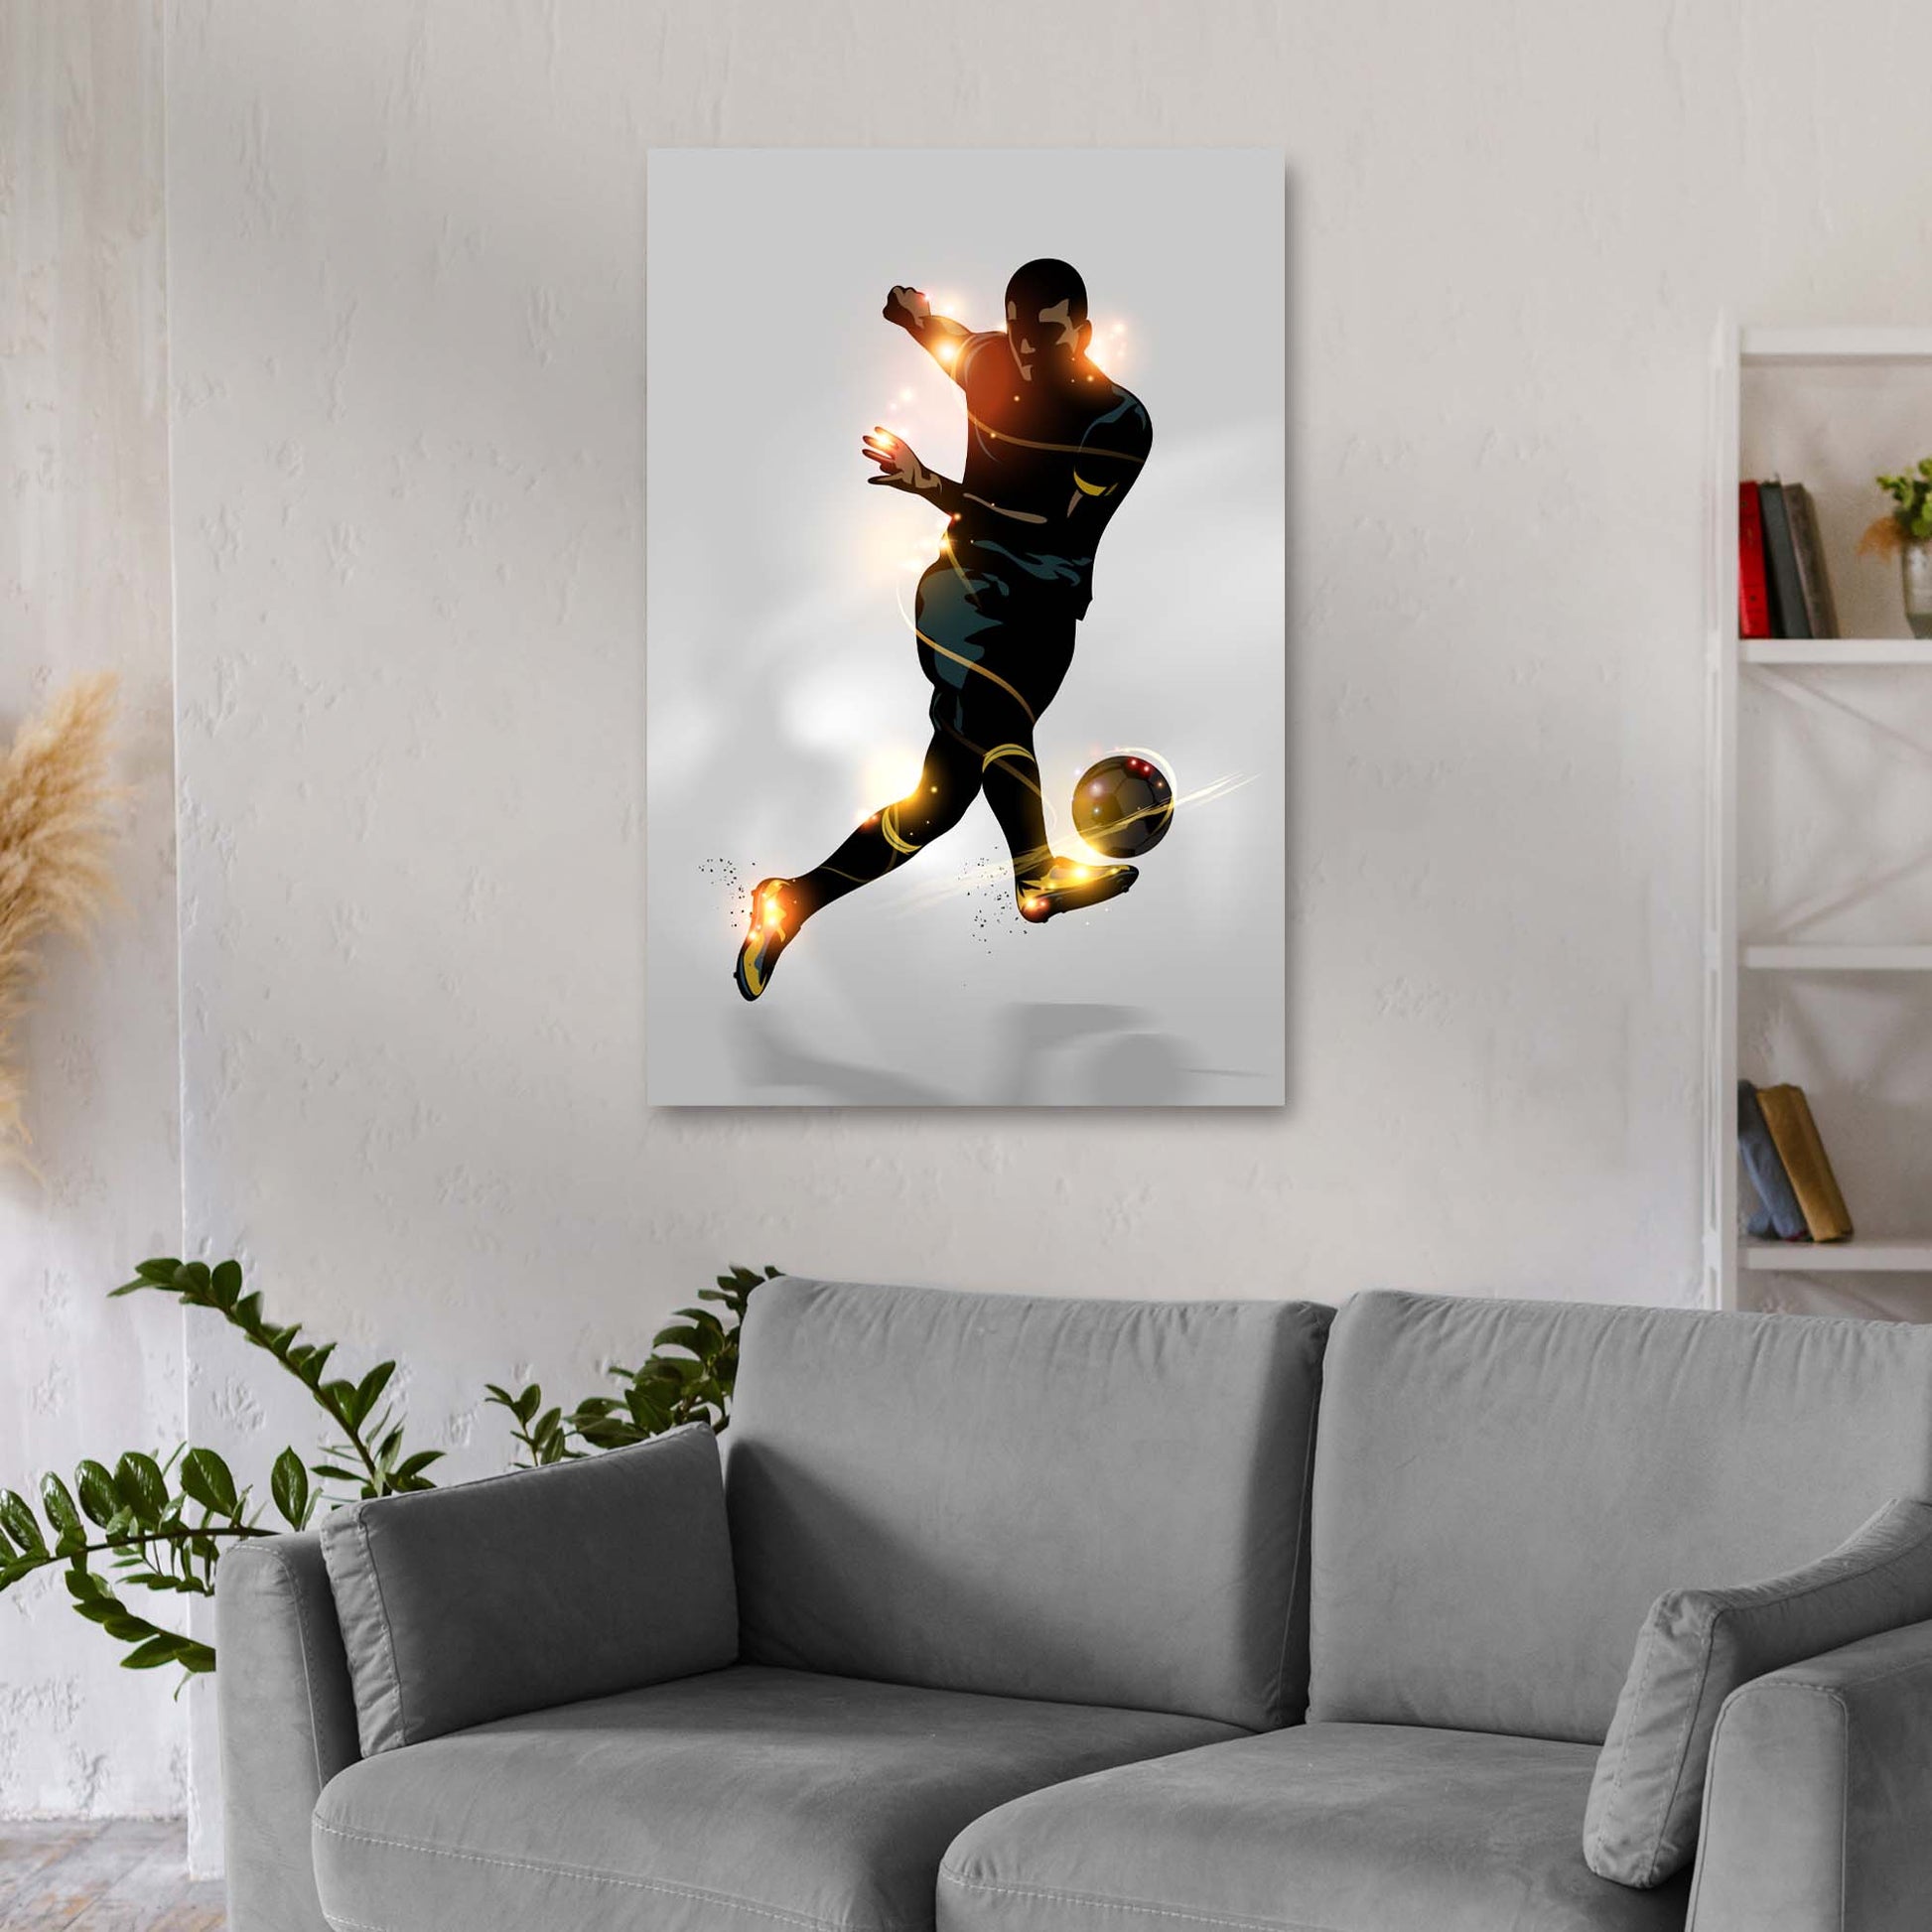 Soccer Player Canvas Wall Art - Image by Tailored Canvases